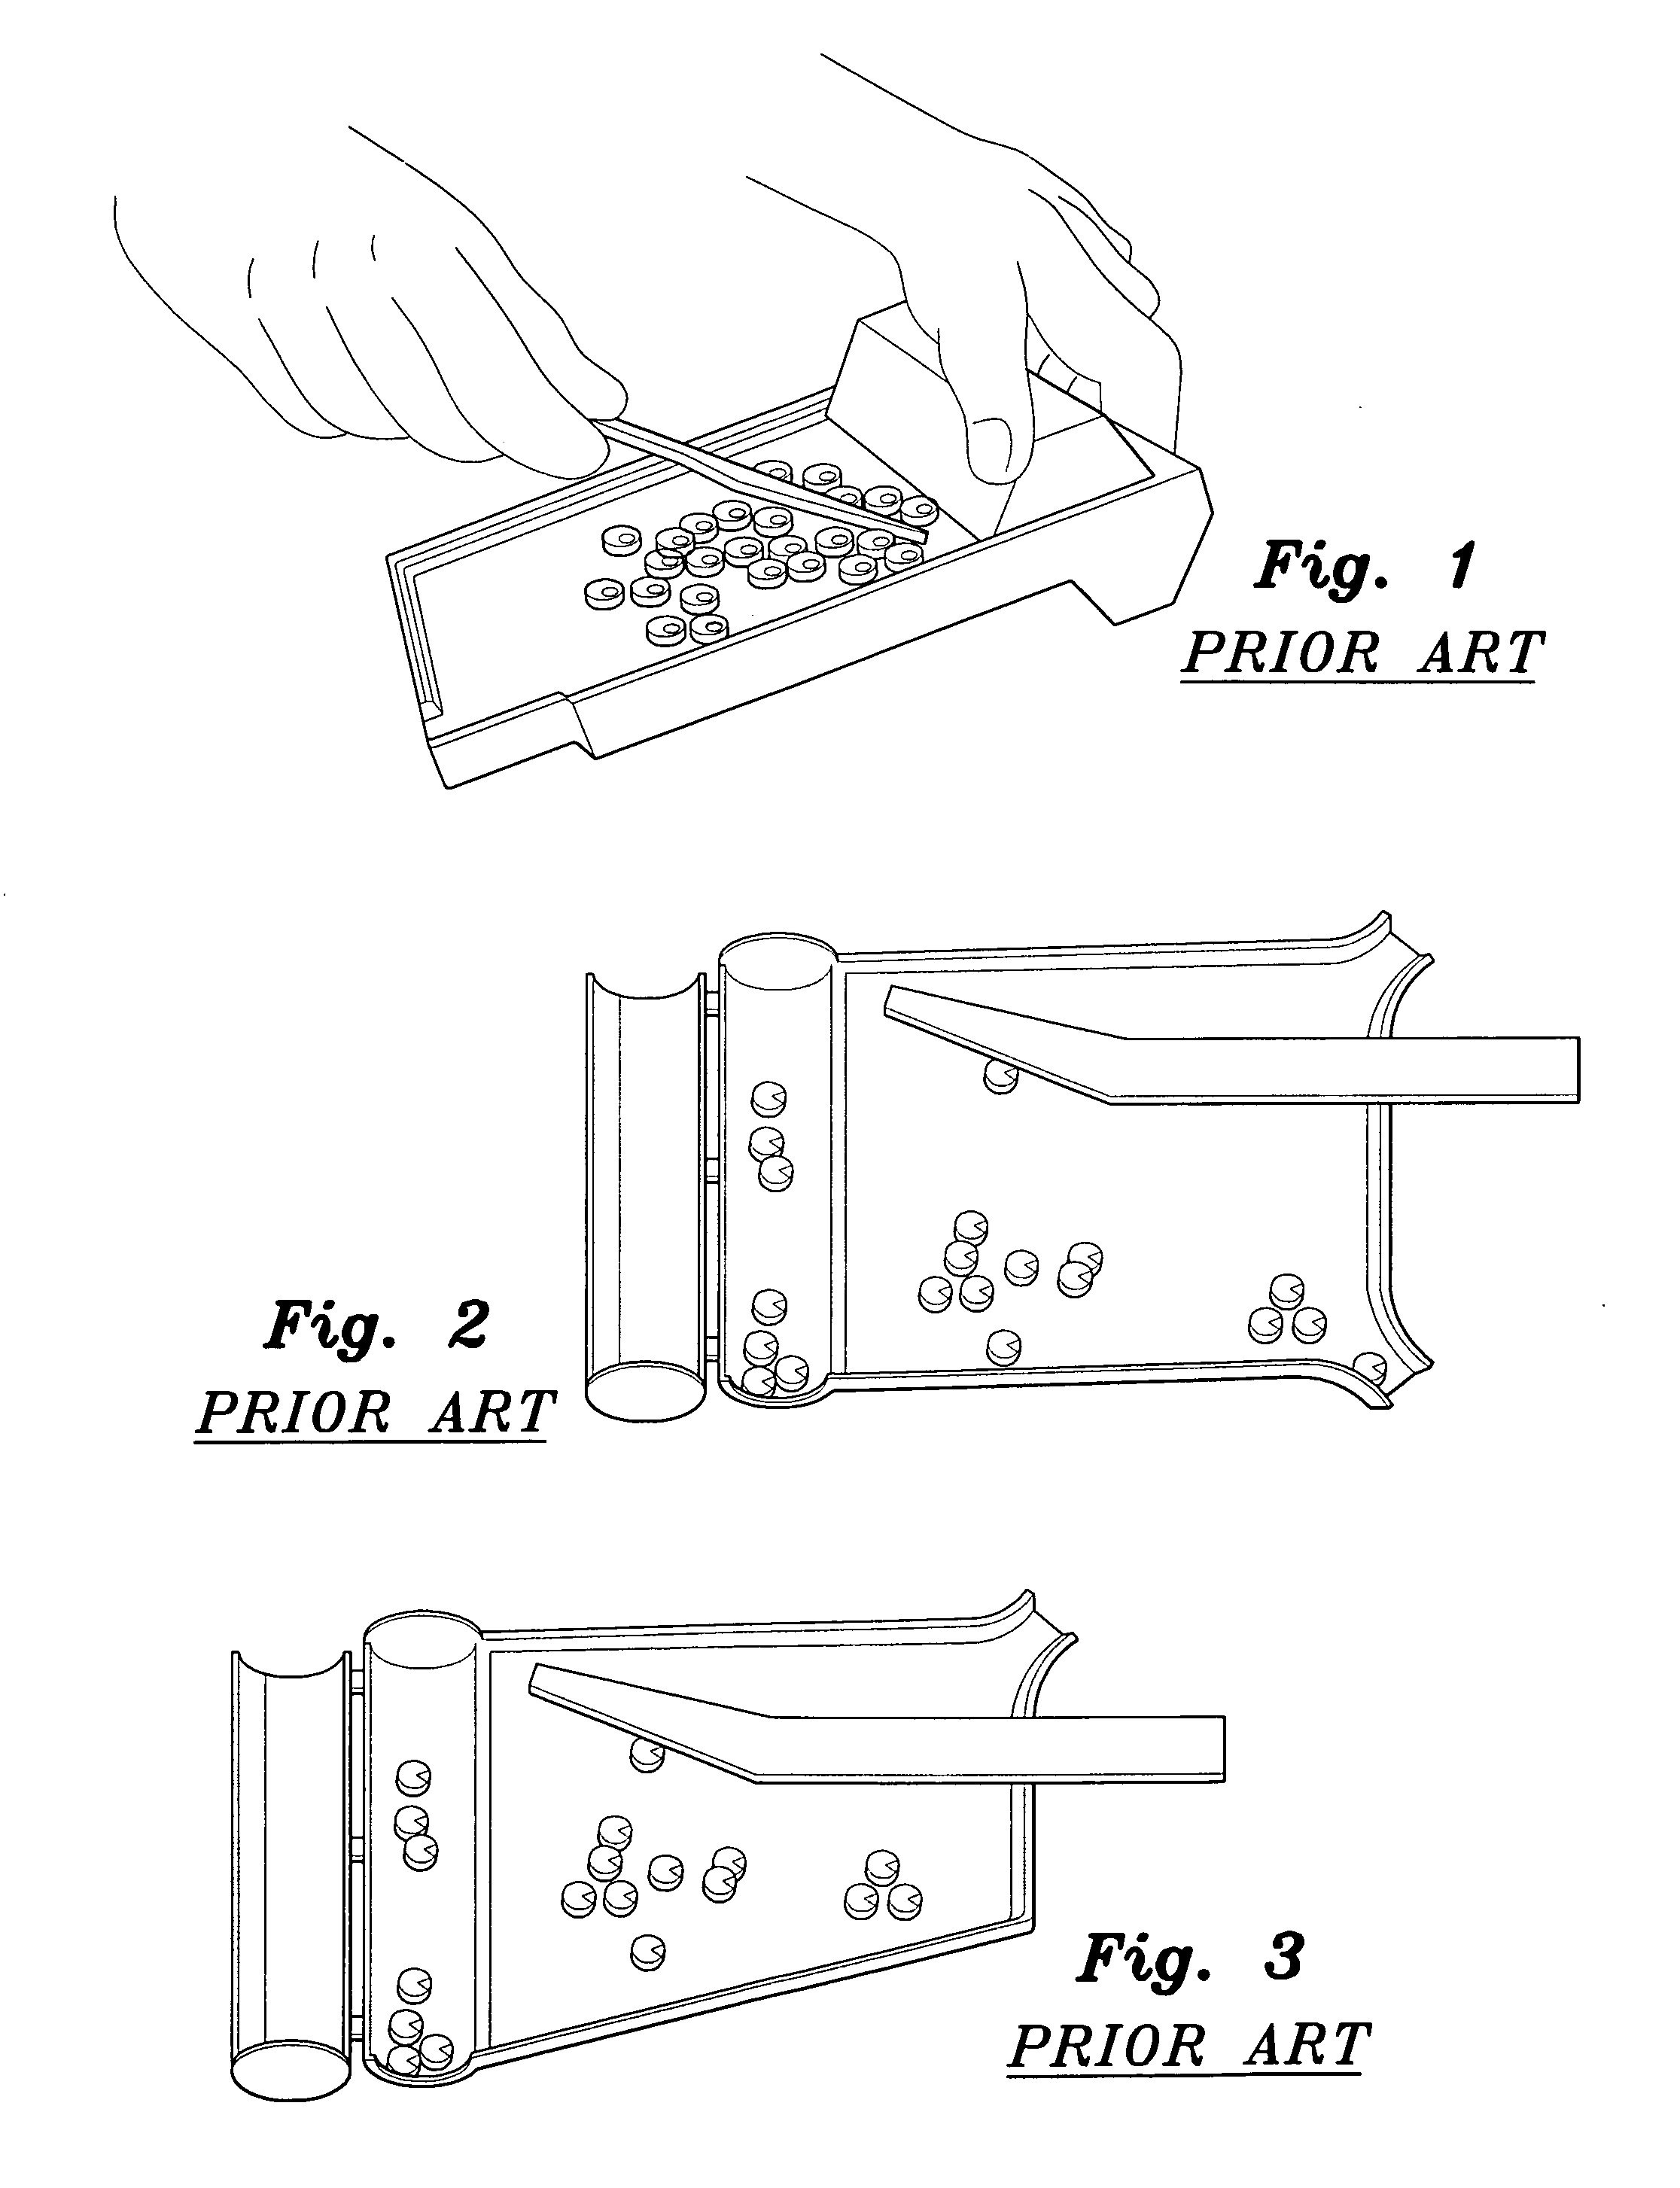 Disposable pill counting device